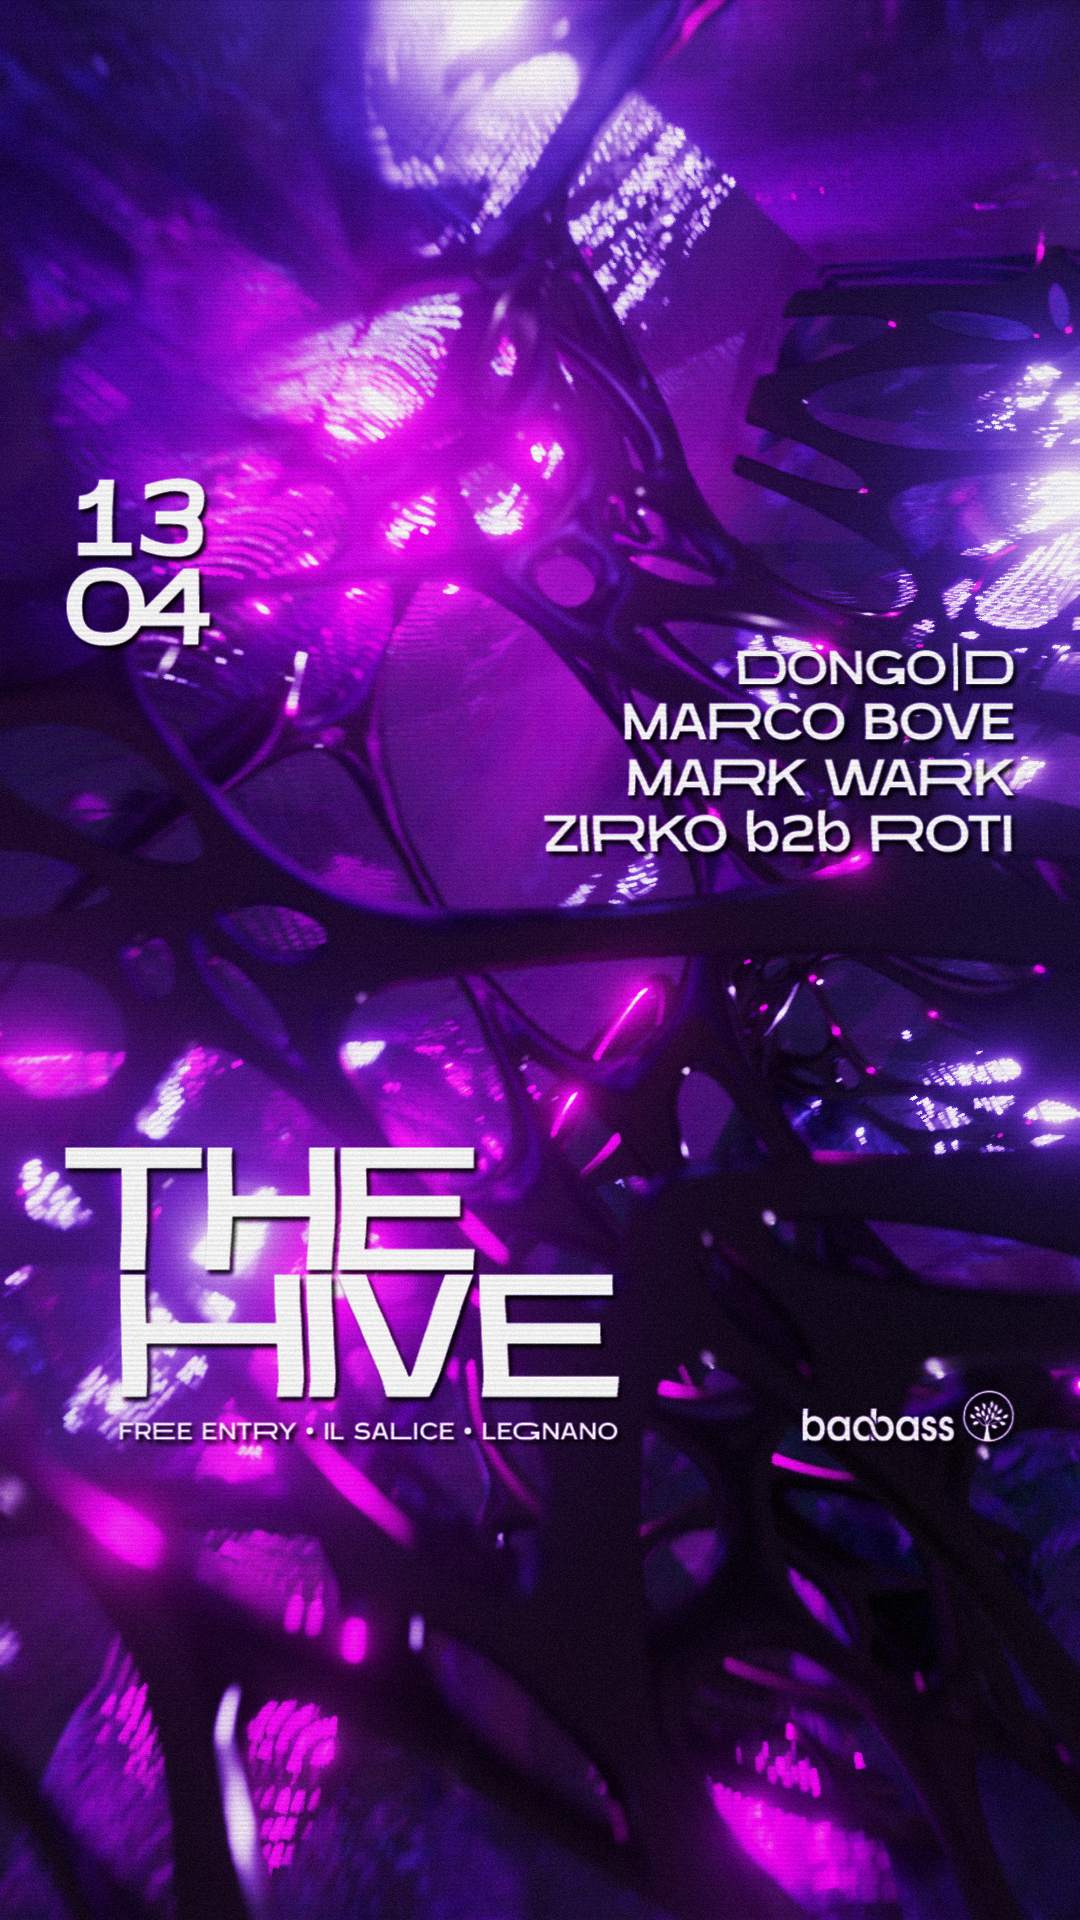 THE HIVE with DONGO|D, Marco Bove - Página frontal